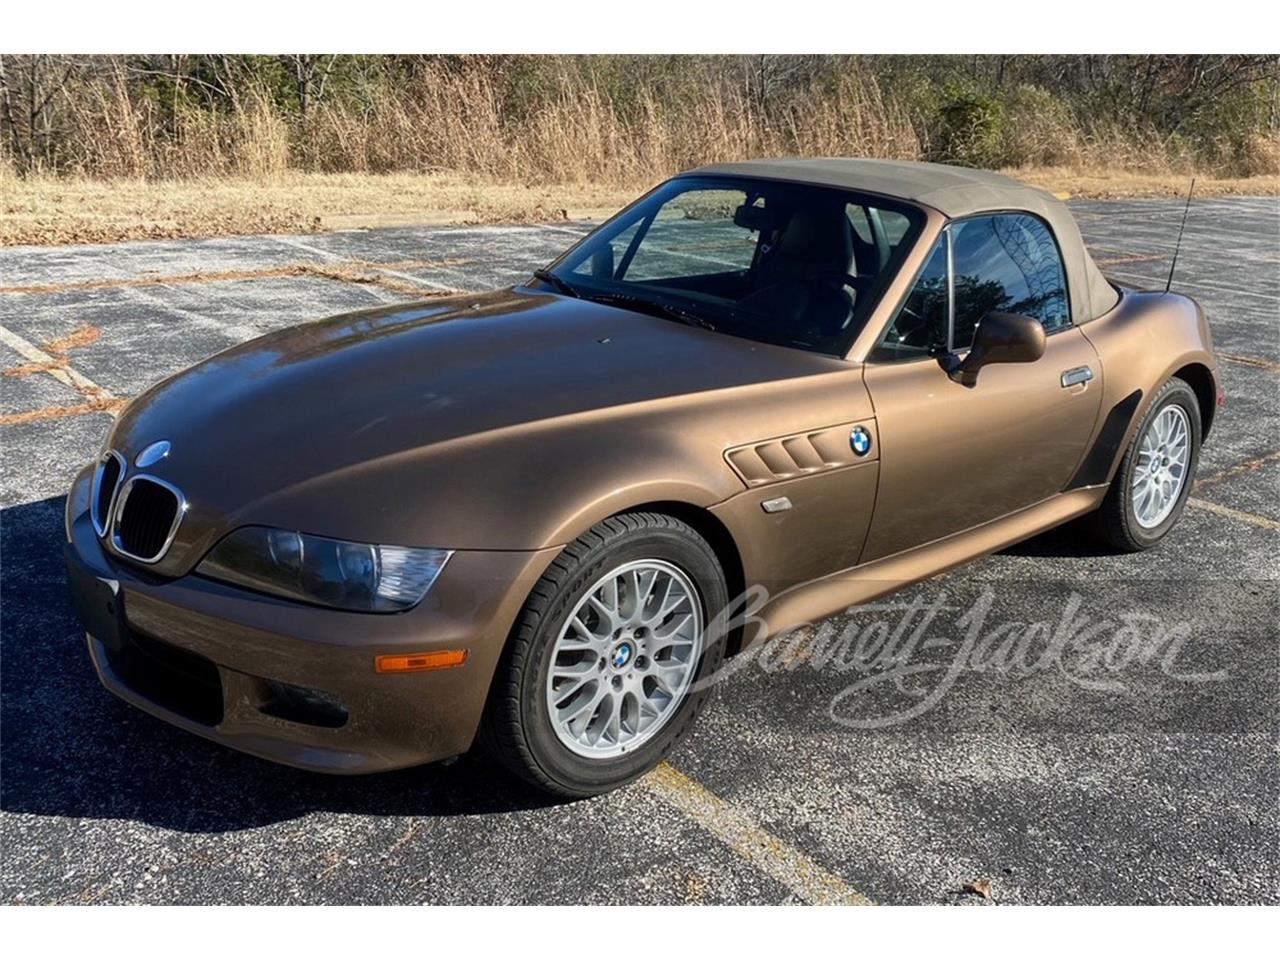 For Sale at Auction: 2001 BMW Z3 in Scottsdale, Arizona for sale in Scottsdale, AZ